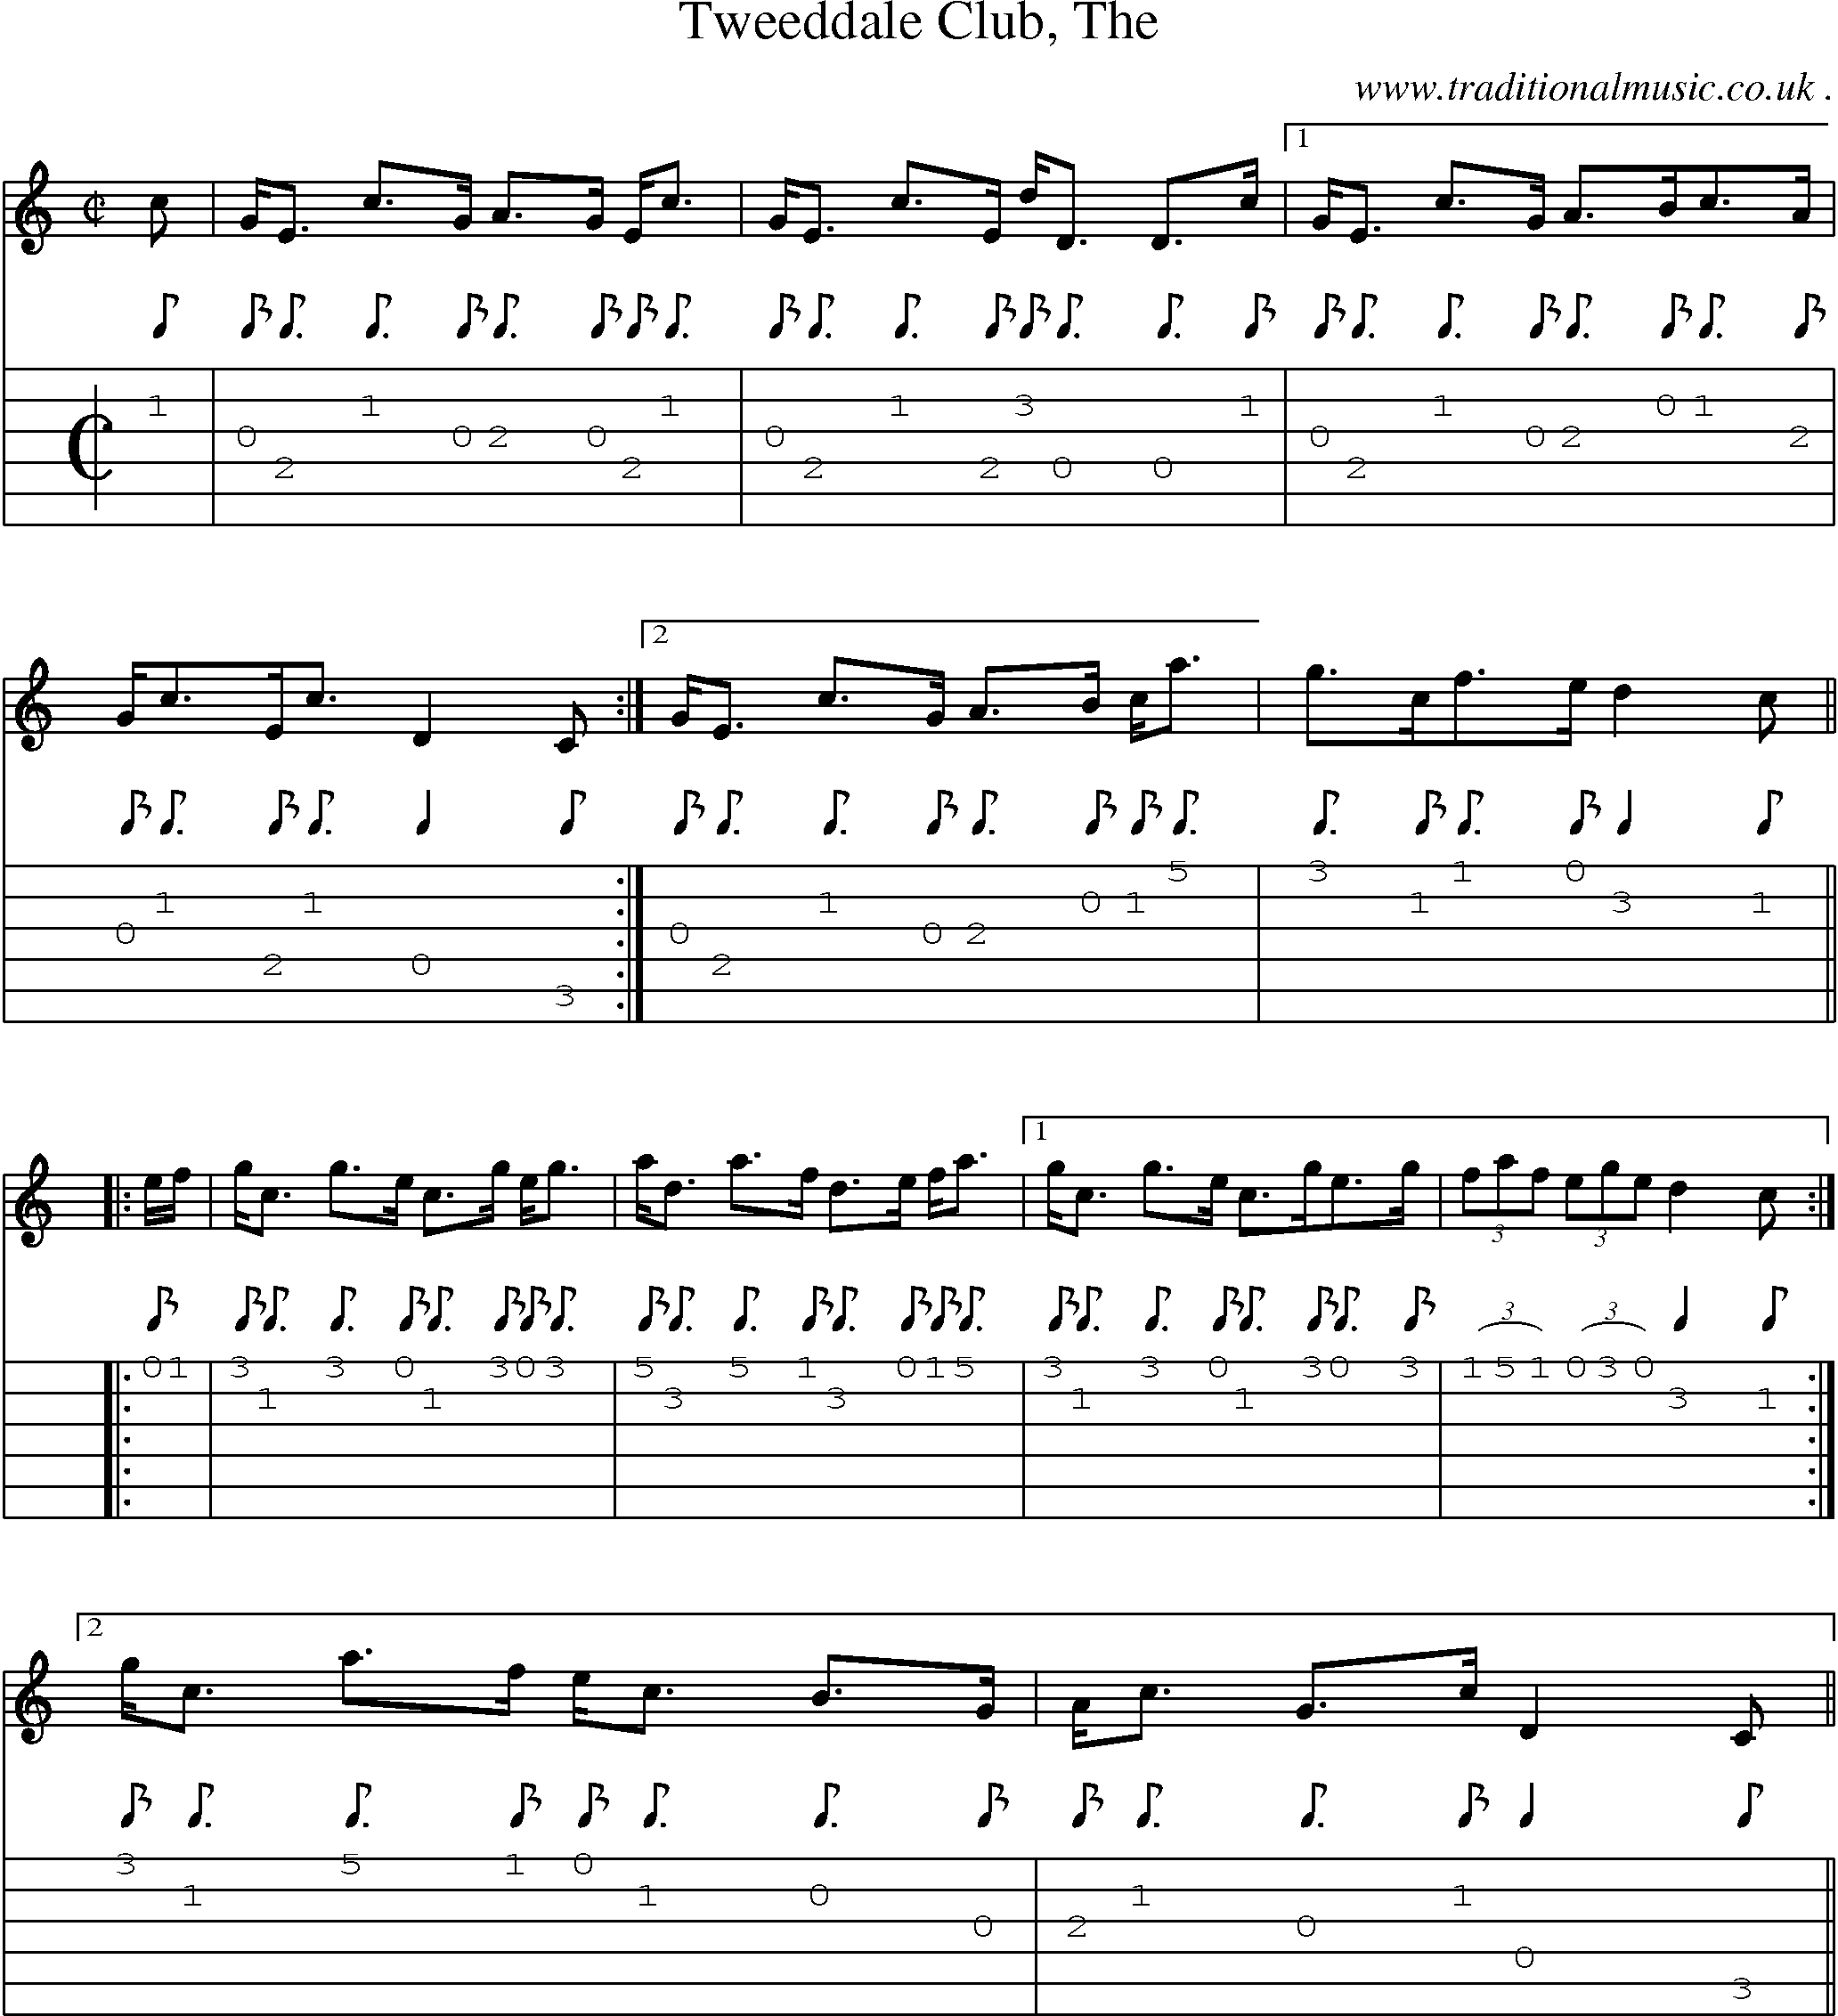 Sheet-music  score, Chords and Guitar Tabs for Tweeddale Club The